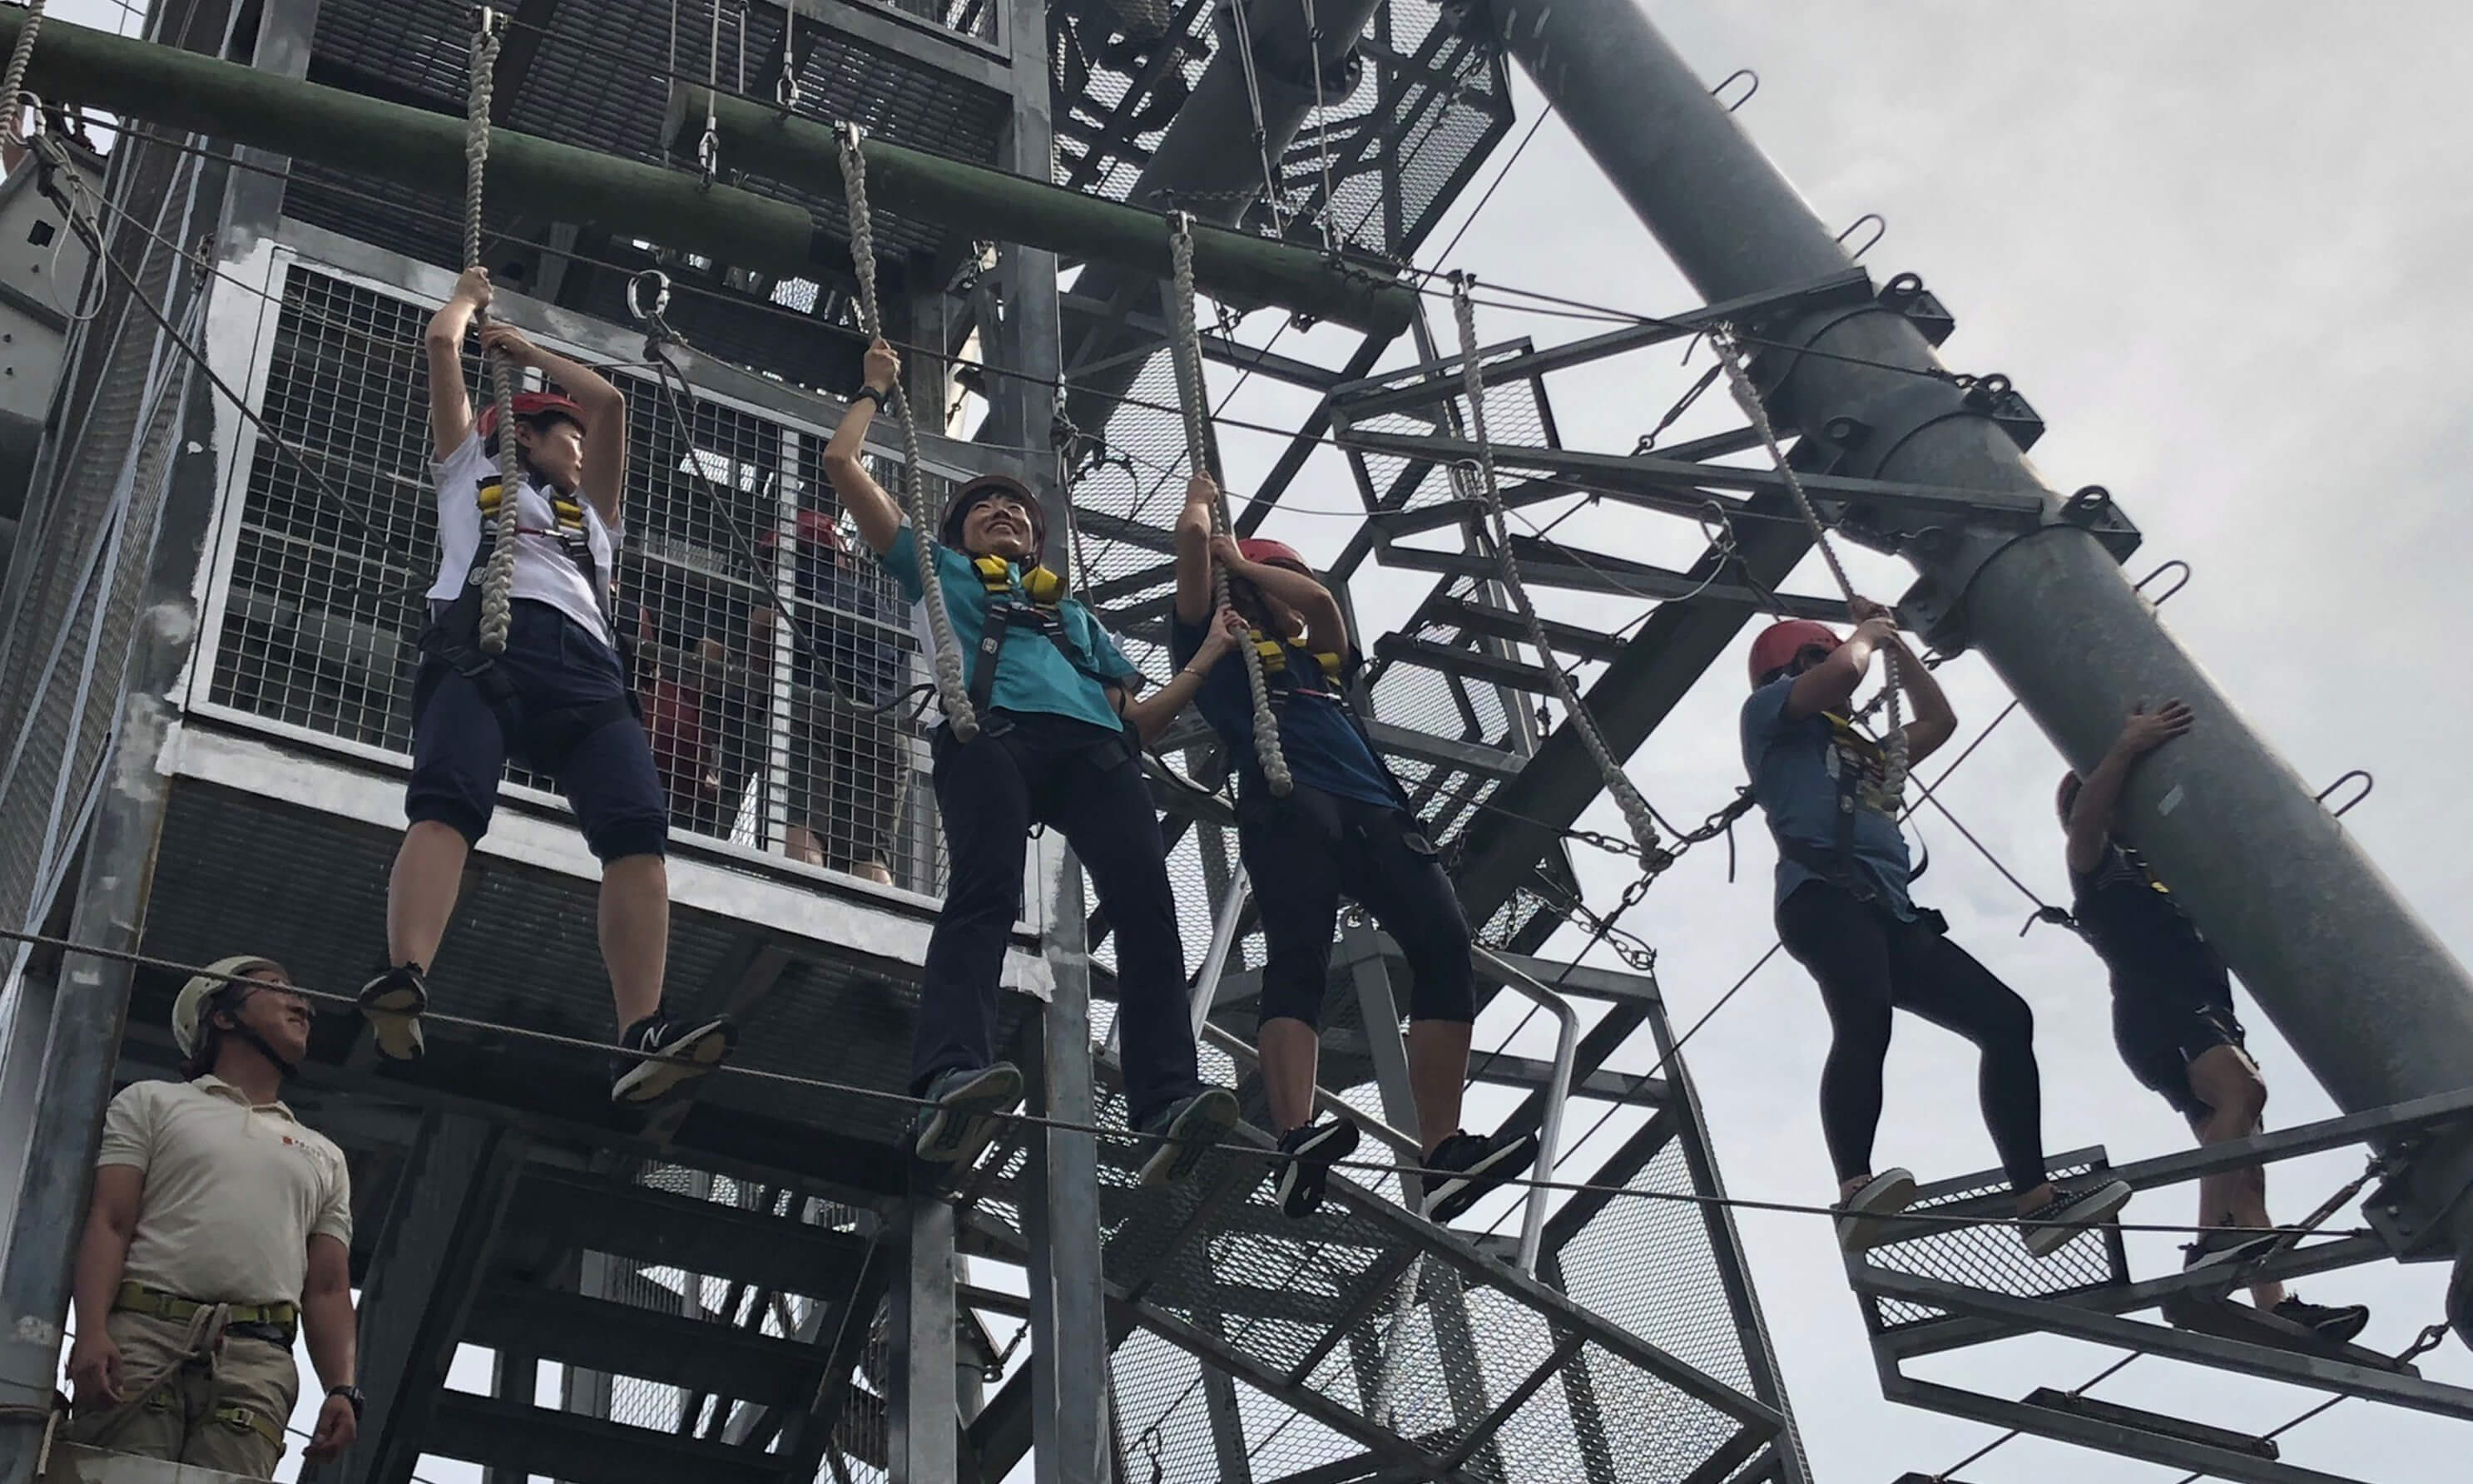 A group of people doing a high element obstacle course